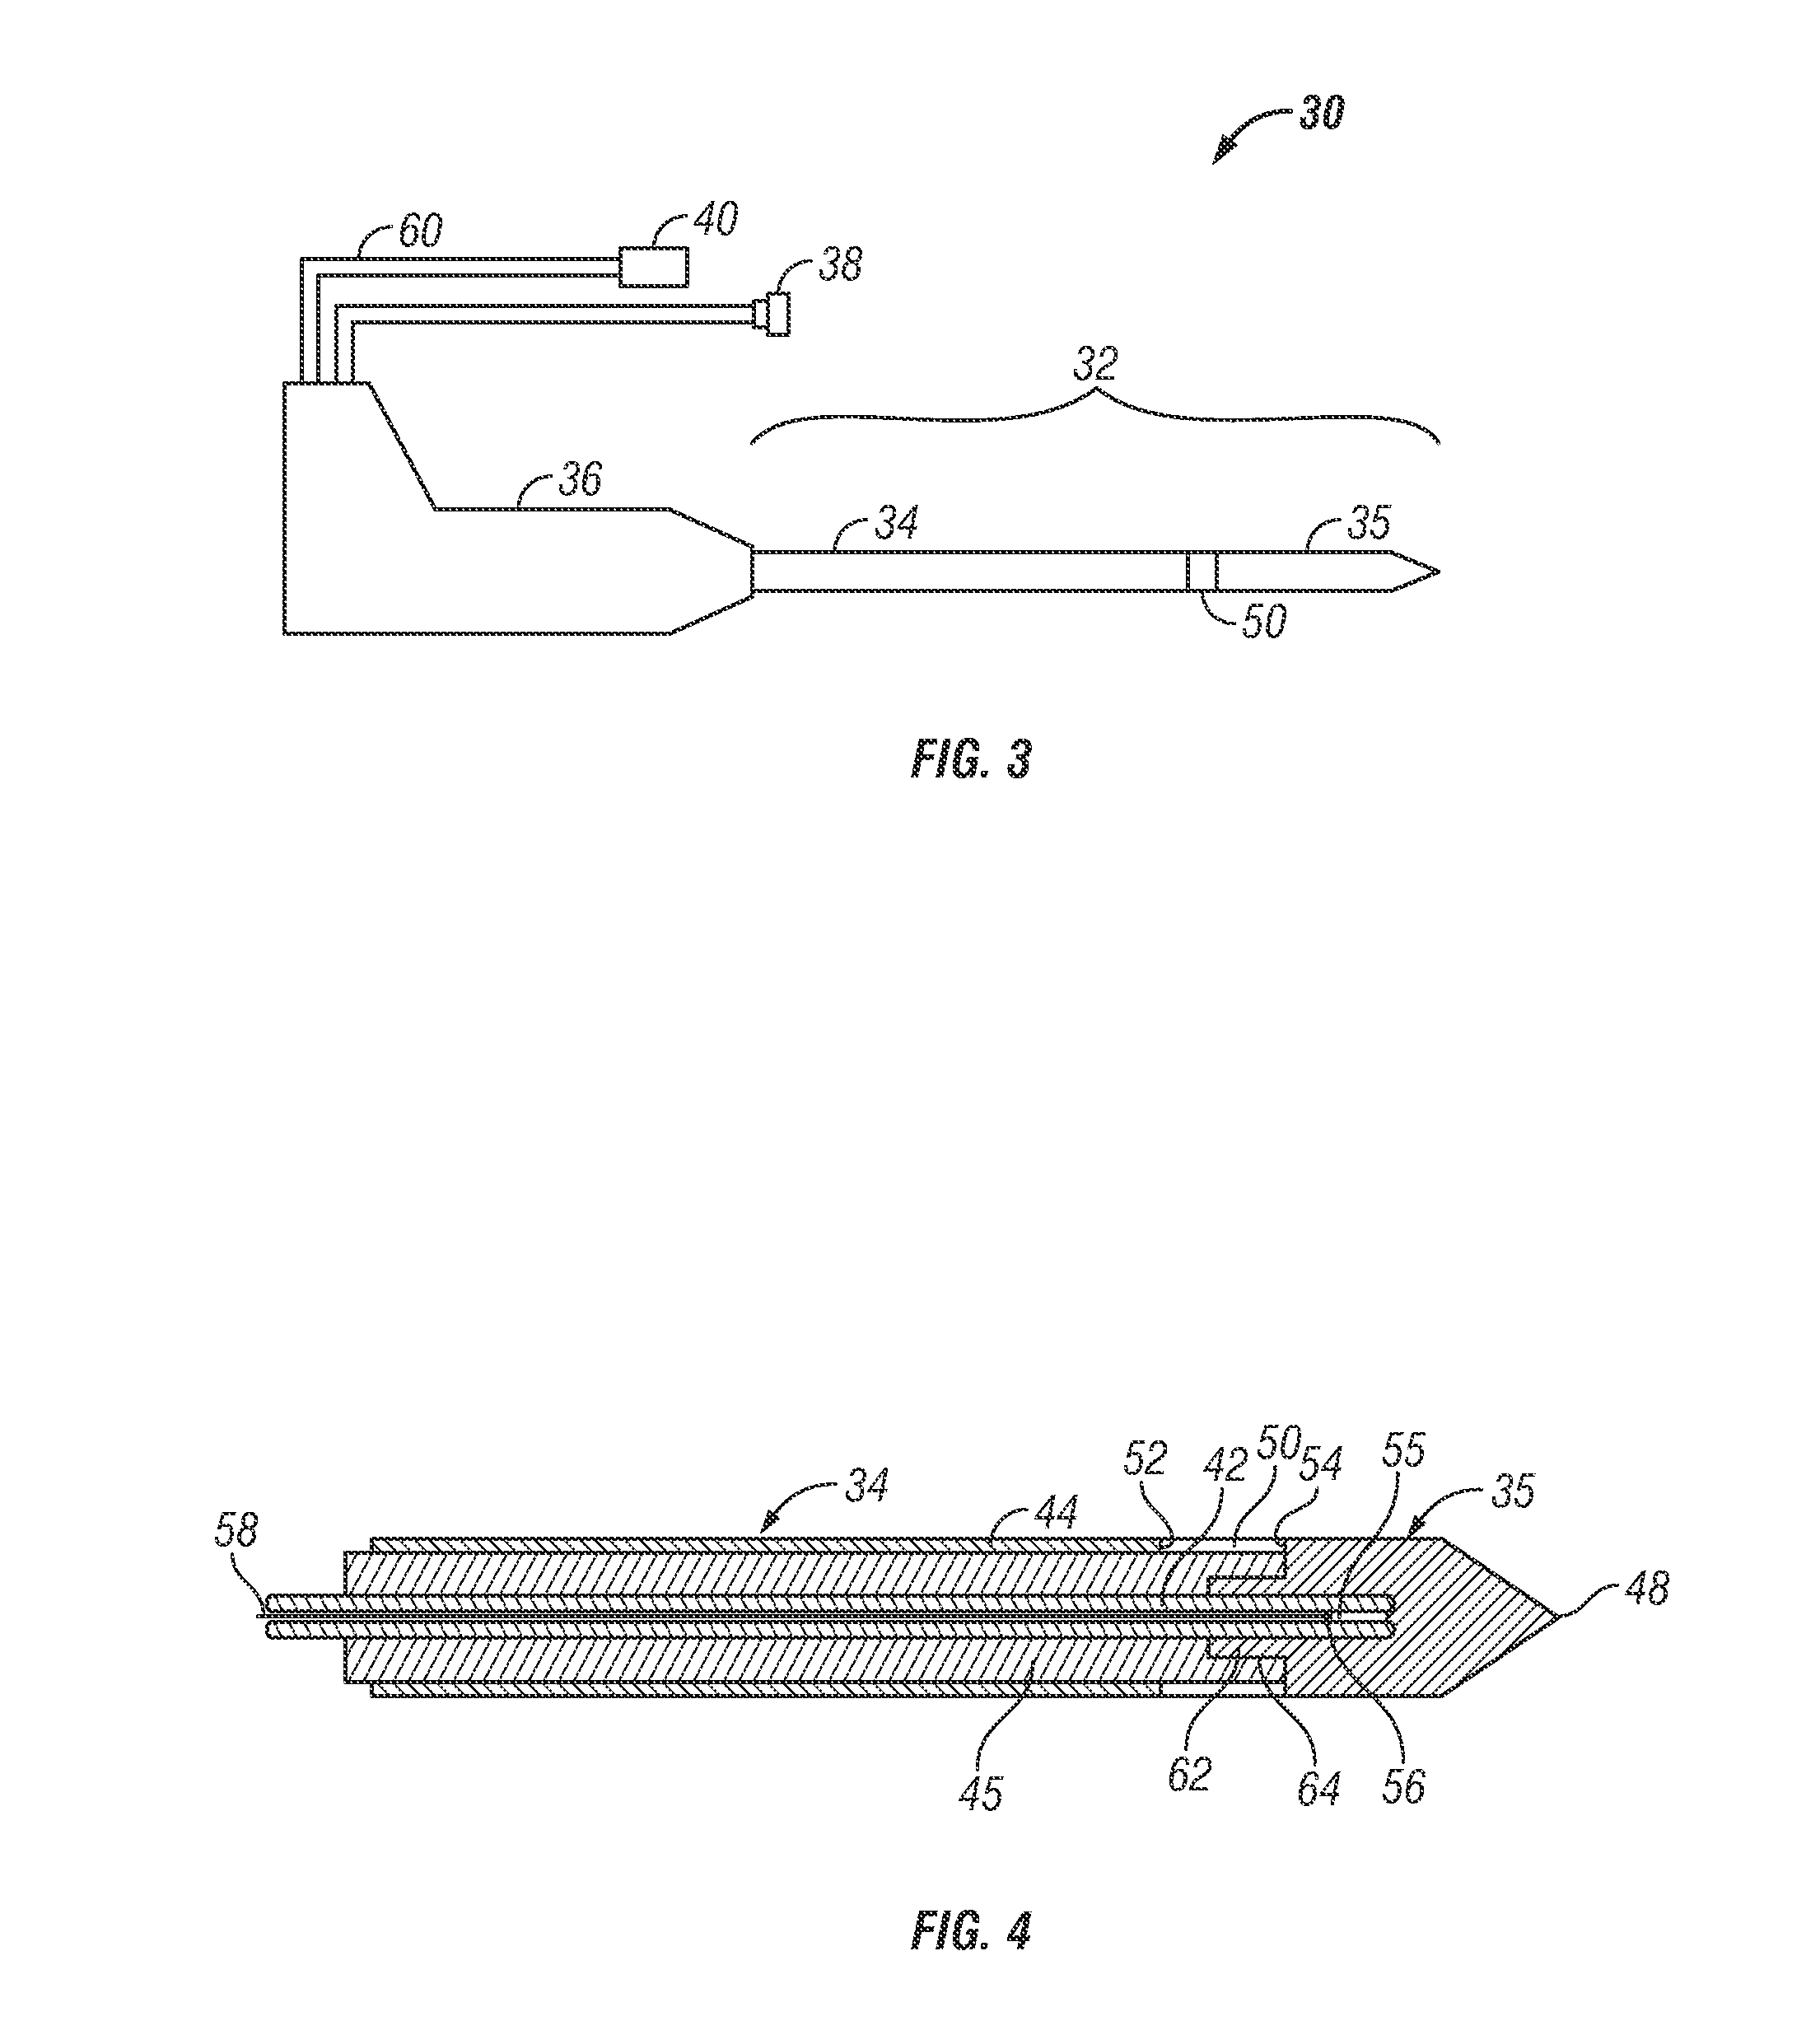 Radio frequency based ablation system and method with dielectric transformer